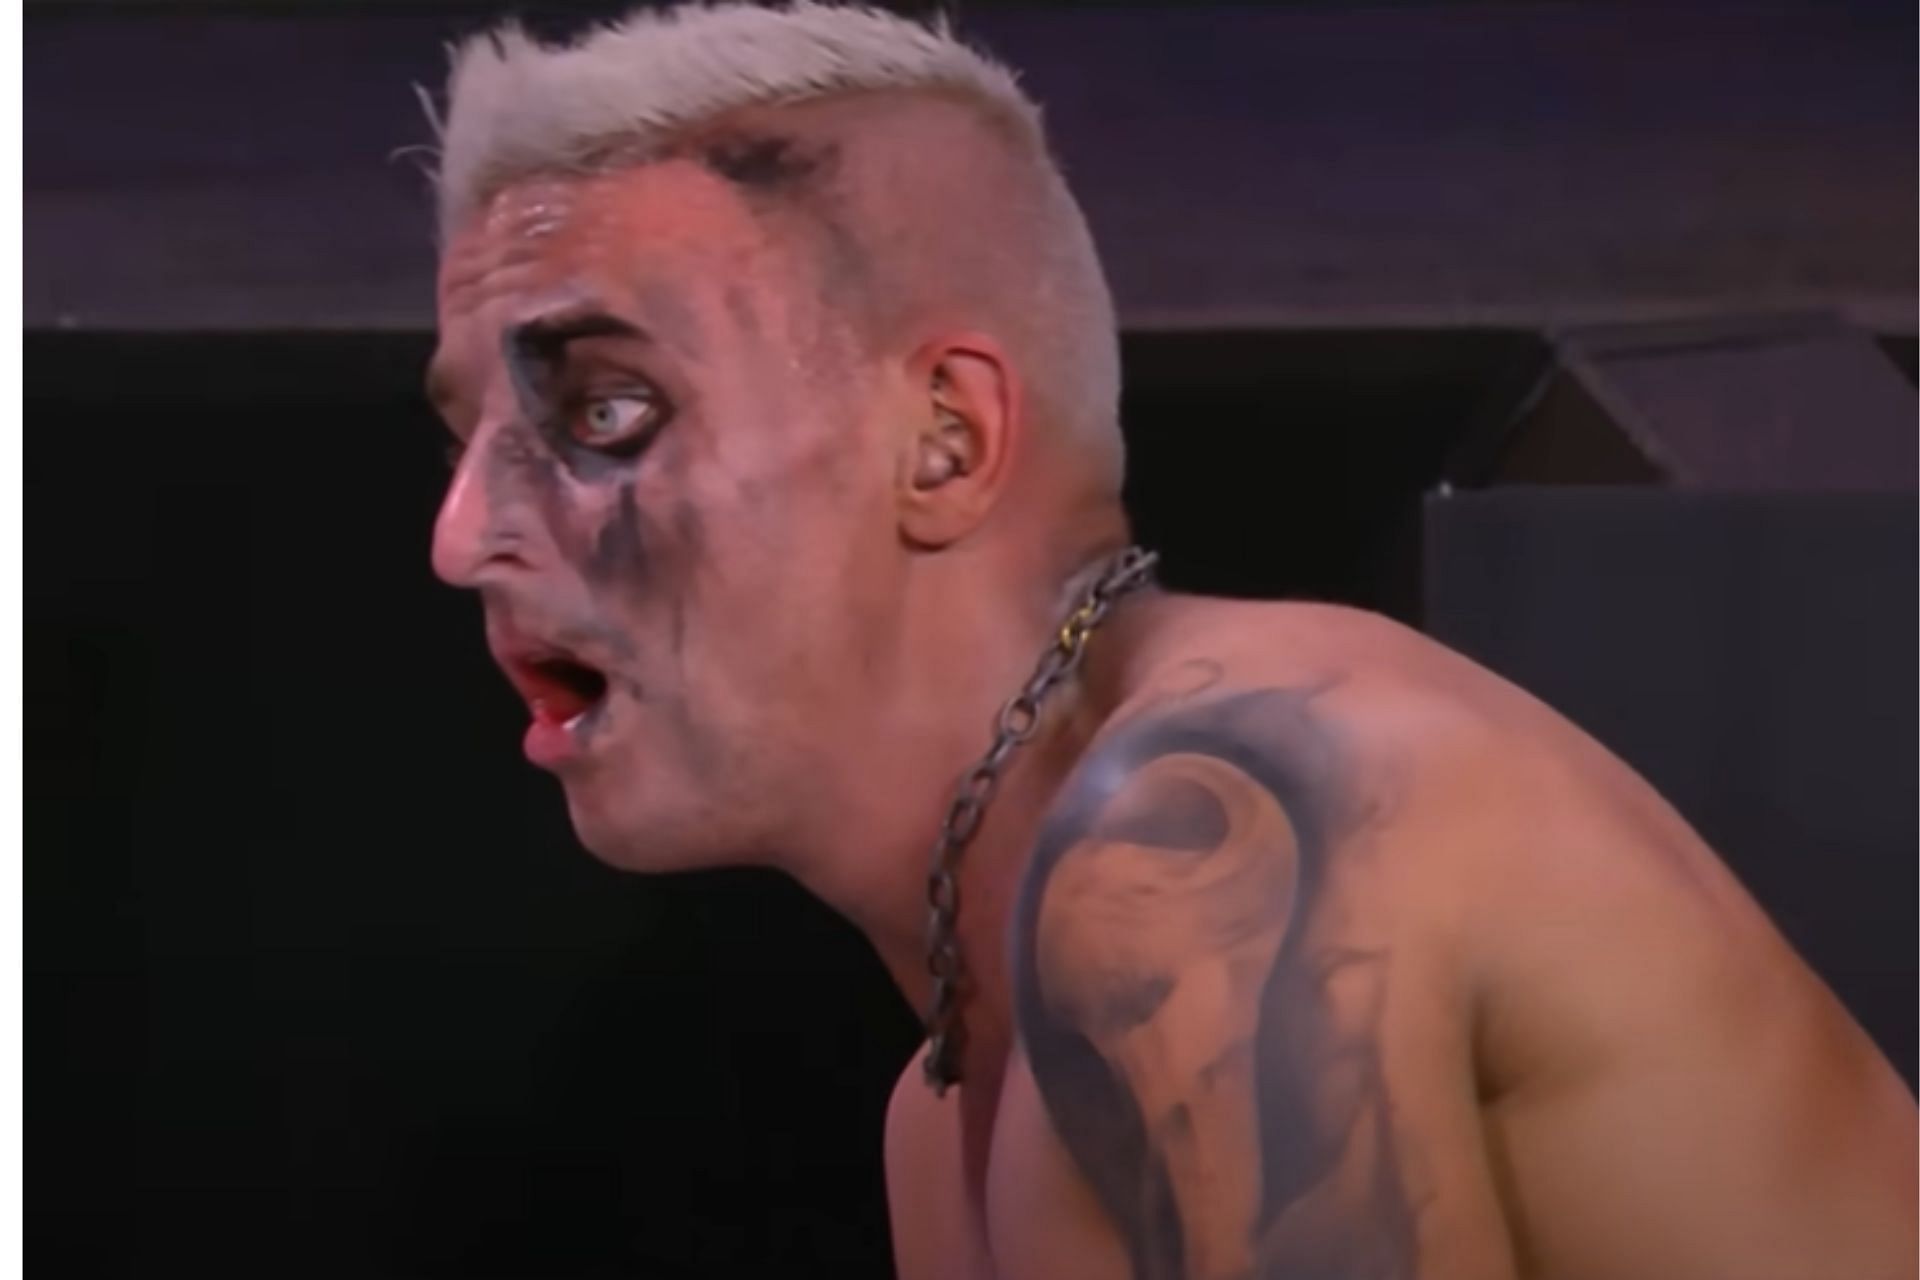 Former WWE Wrestler has some thoughts about Darby Allin